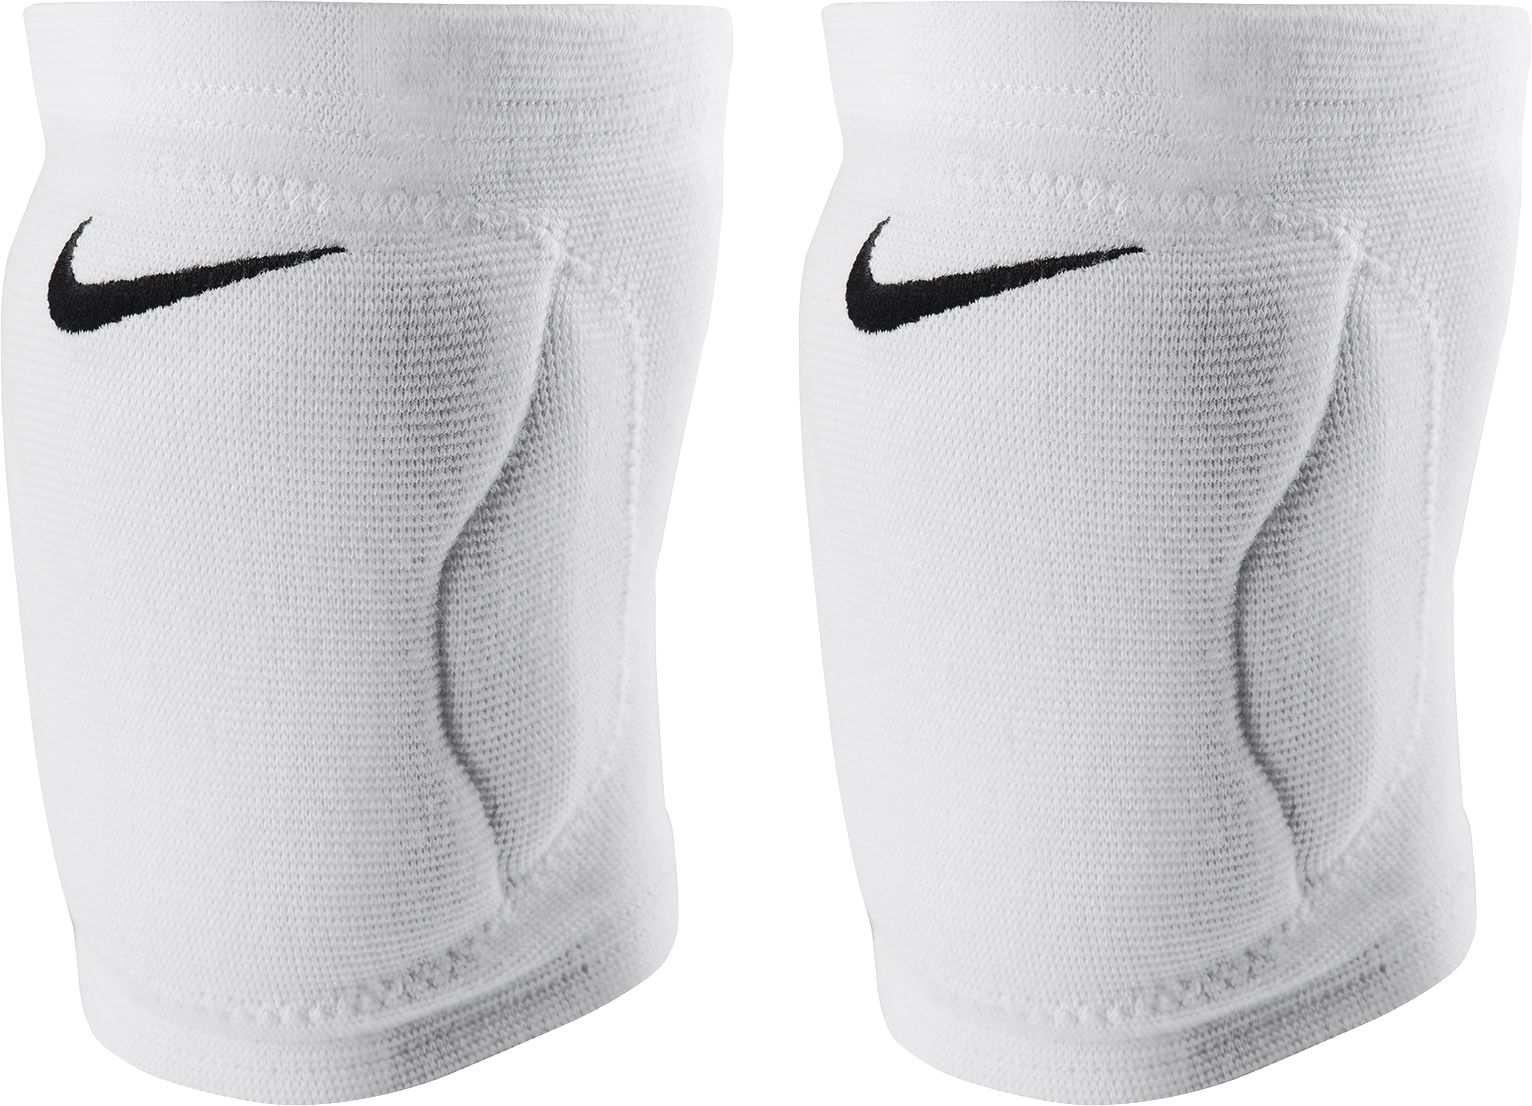 nike volleyball knee pad size chart